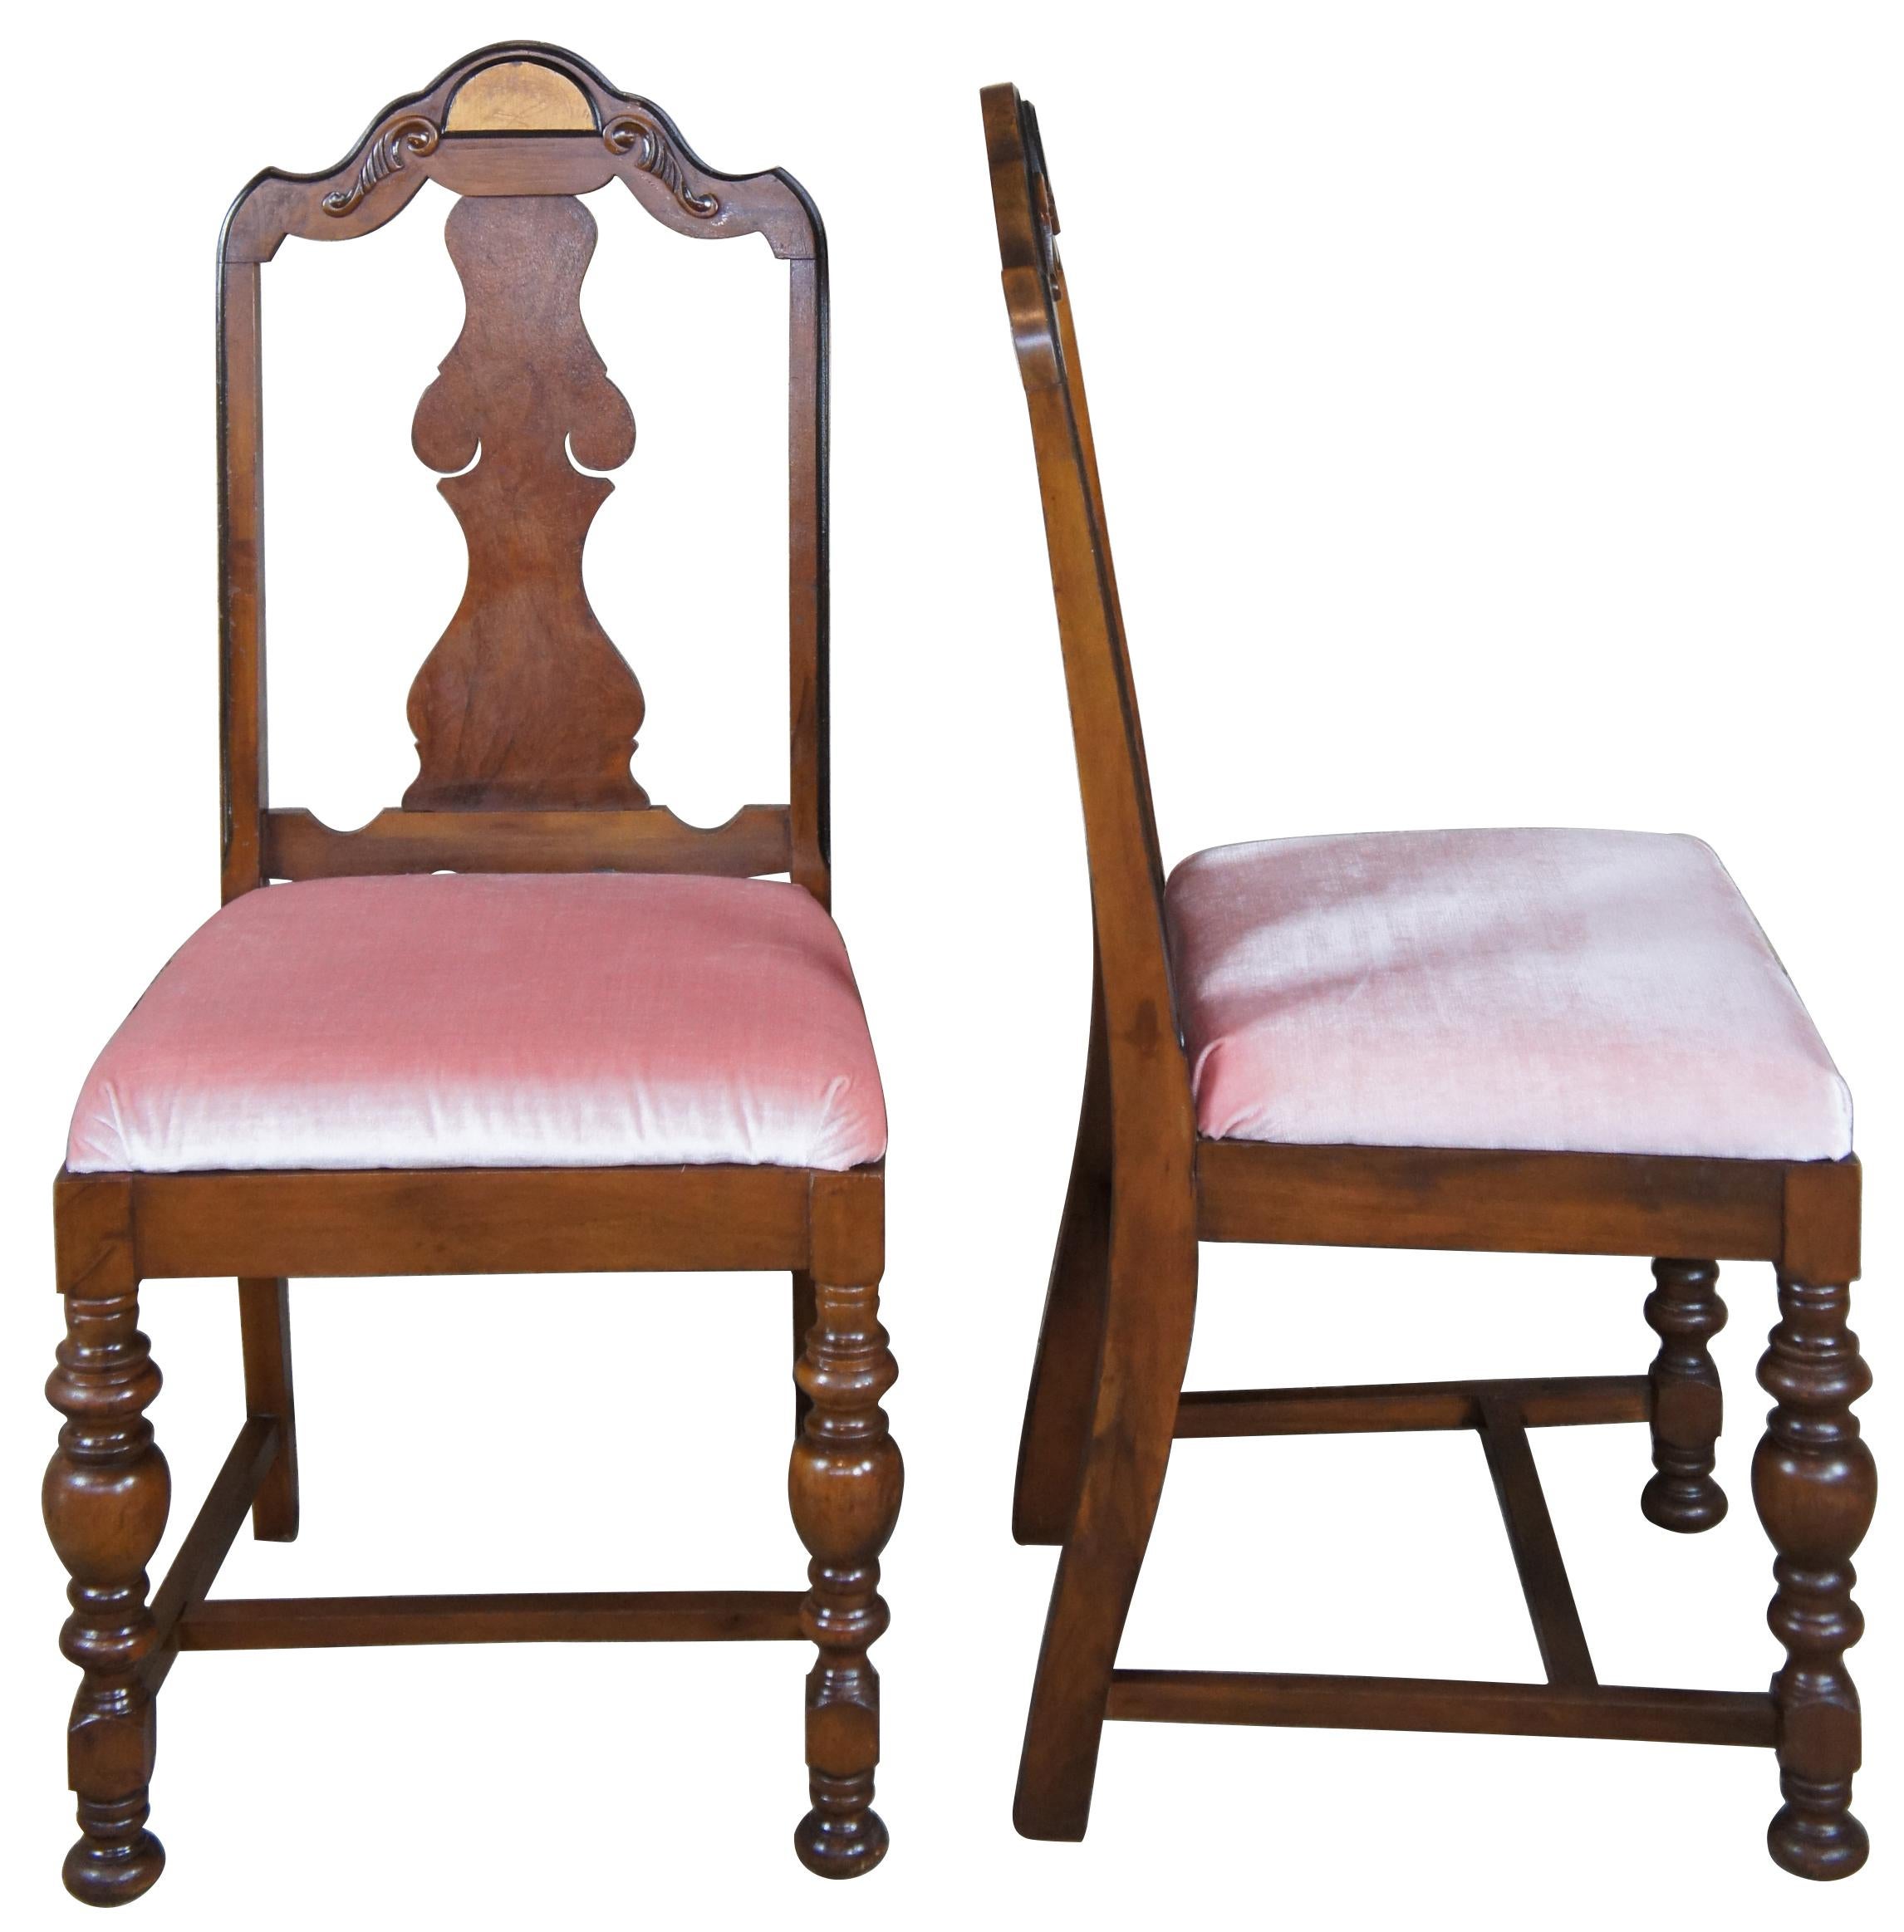 Early 20th century Jacobean style dining chairs. Made from walnut with a accent along crown. Features vase shaped splat, ab arhed crown with scrolled accents and turned baluster supoorts connected by an H-stretcher.